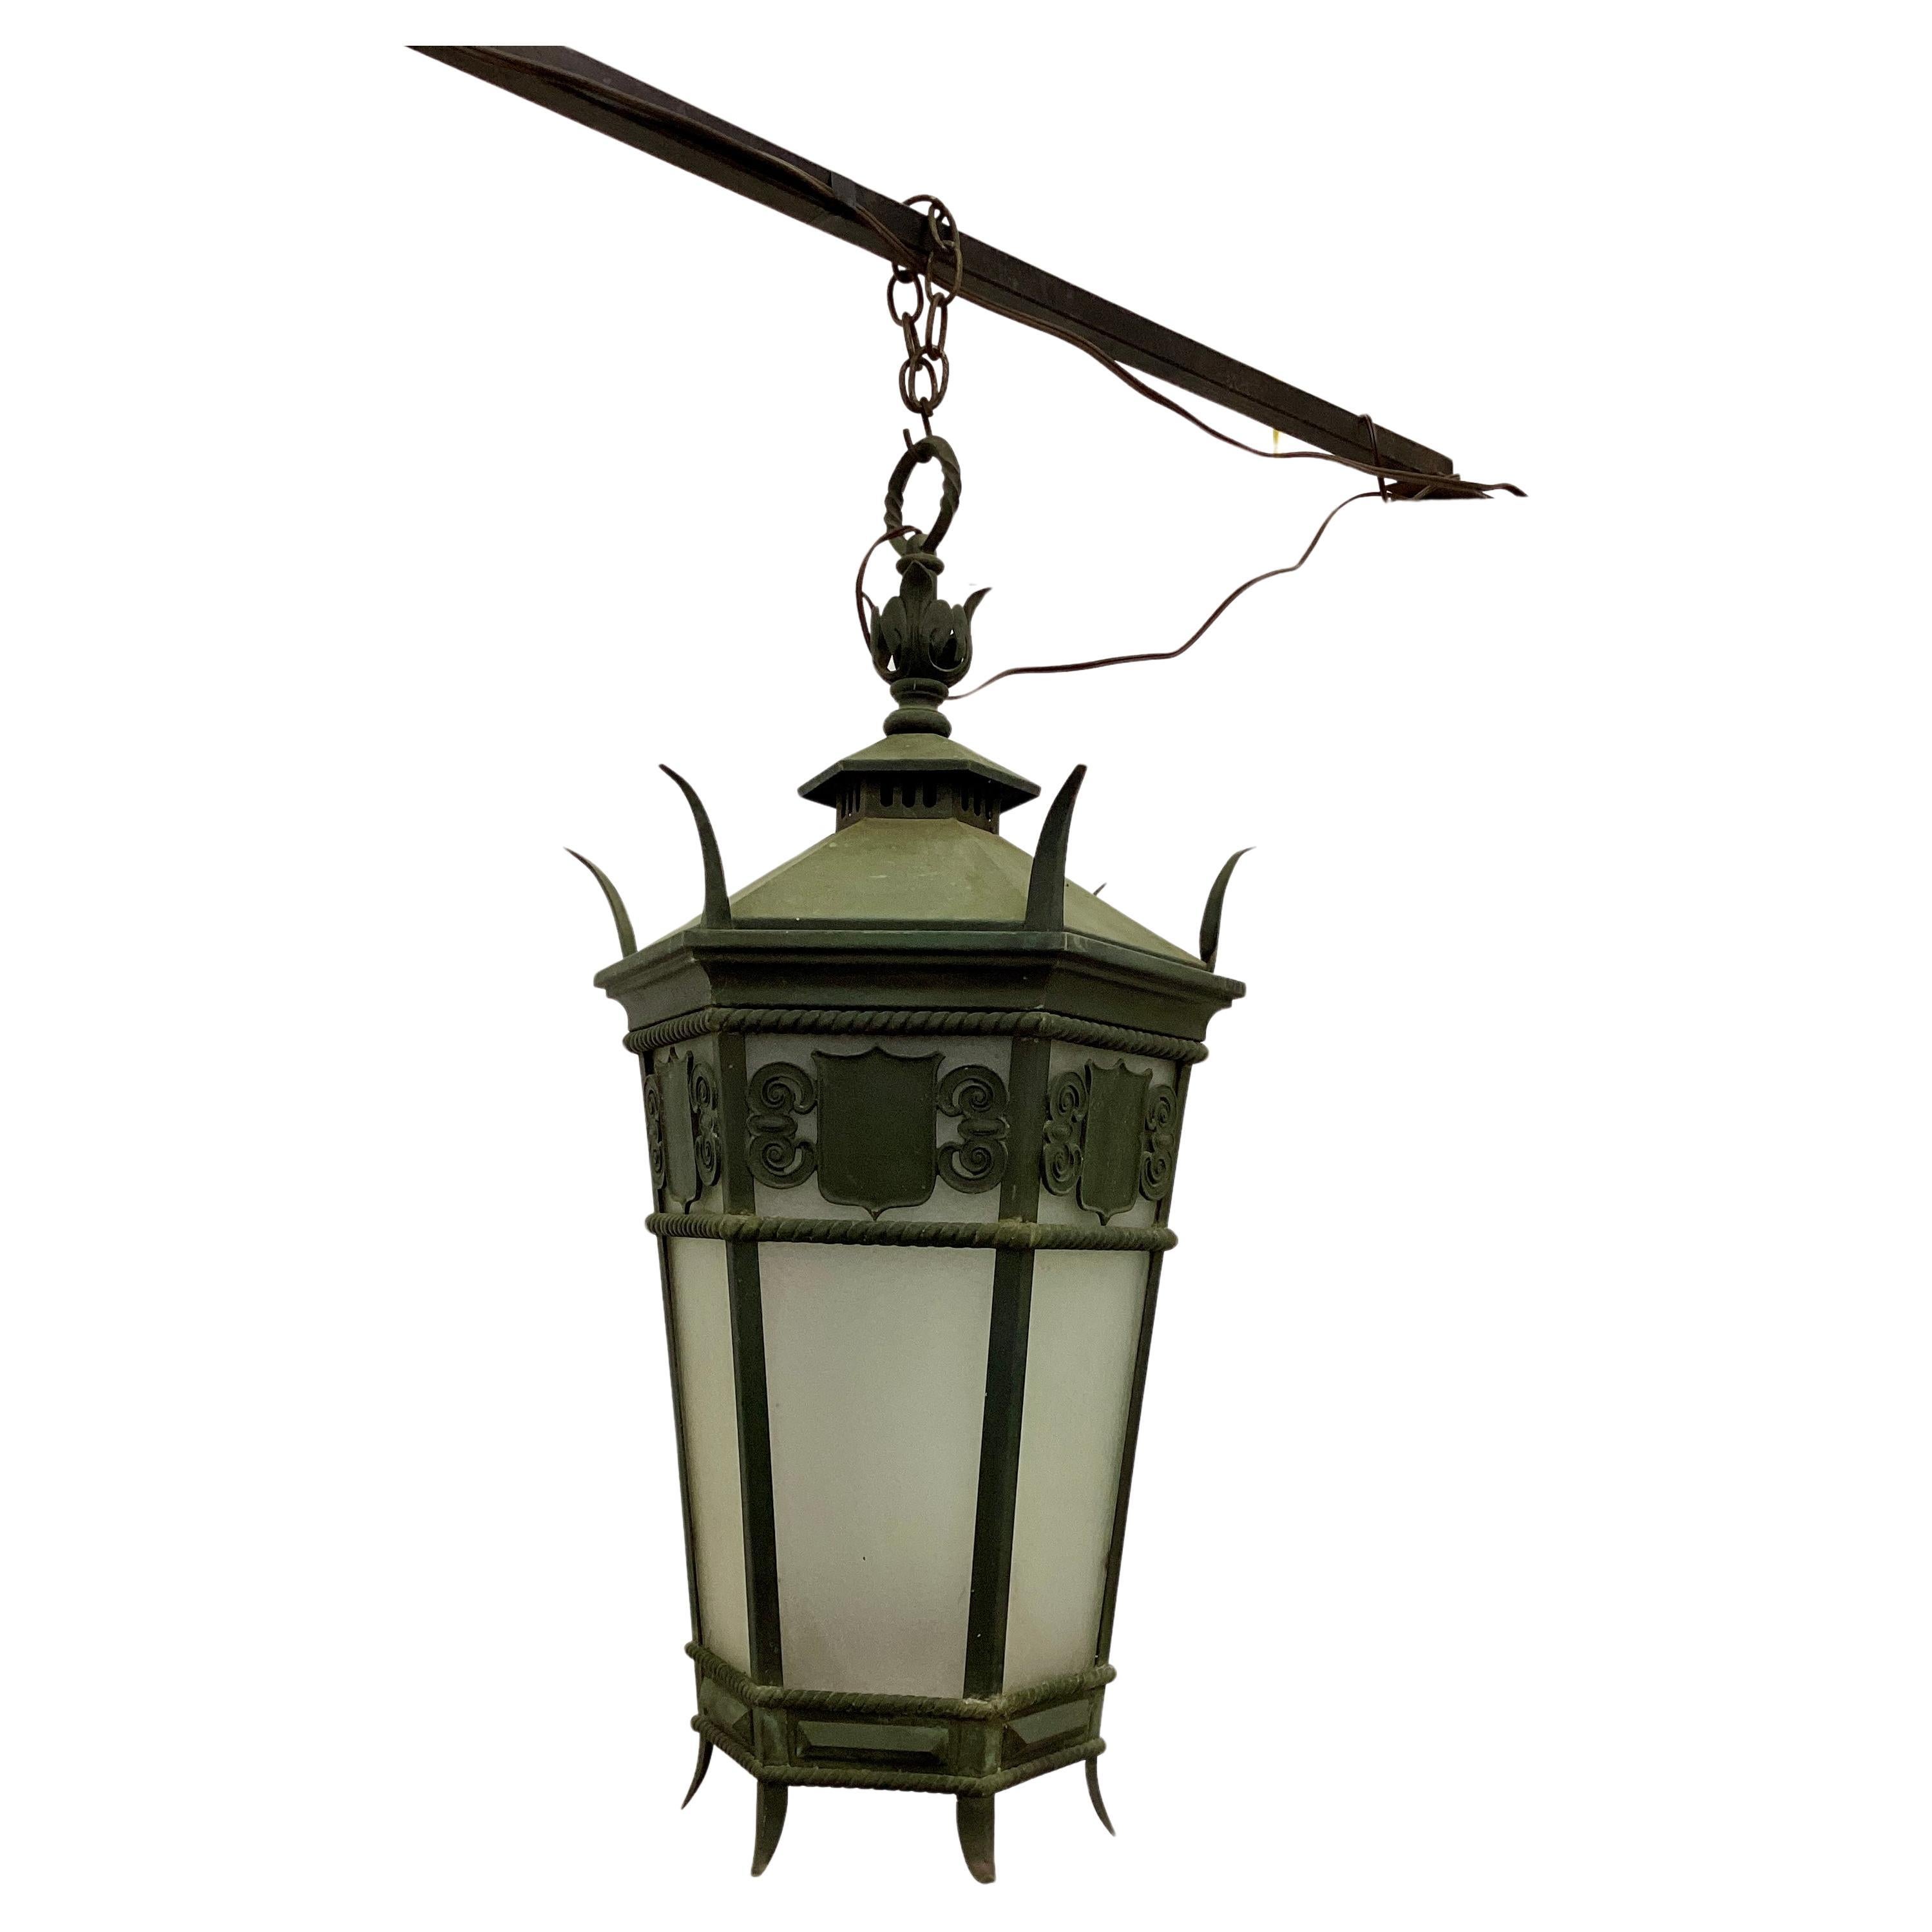 Antique Hall Lantern with Verdi Gris Copper Patina with frosted glass panels. Wired and in working condition, this lantern can also be used outdoors.
